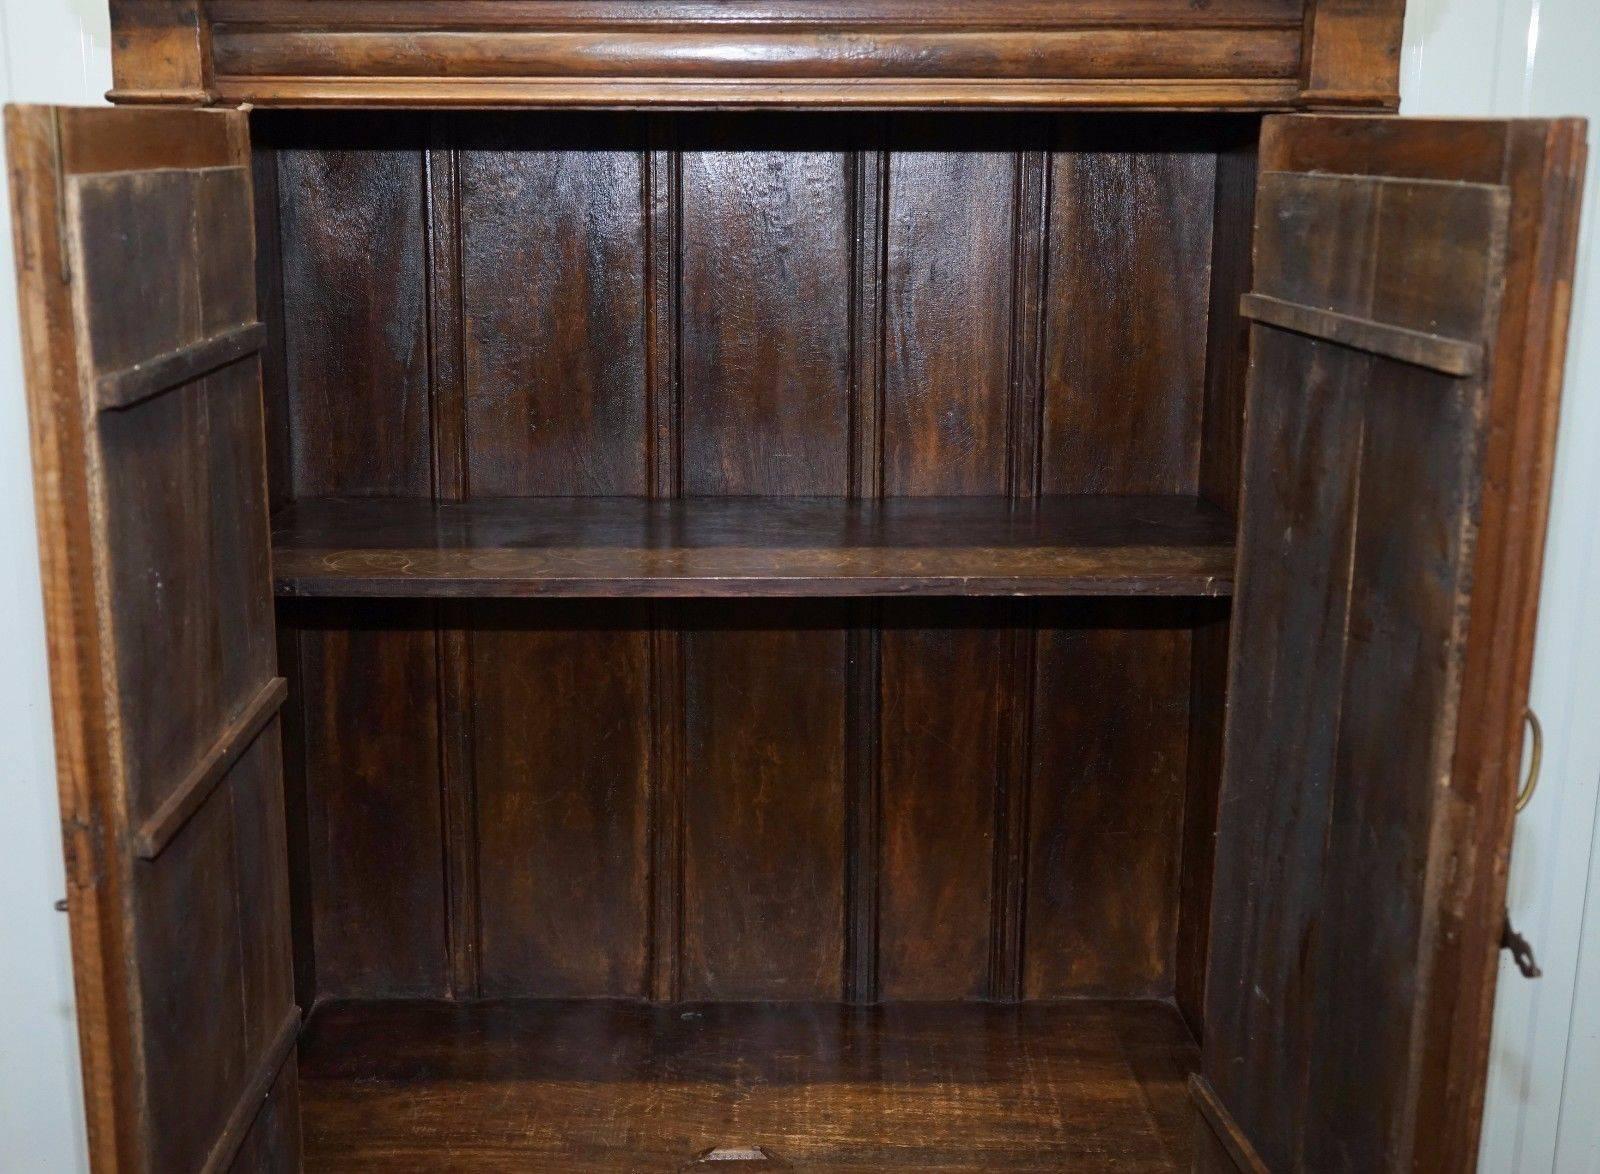 We are delighted to offer for sale this lovely solid hand-carved teak cupboard with mirrored doors

A rare and very substantial find, the timber is thick, hand cut and carved with a lovely rich warm patina, each panel is very chunky and